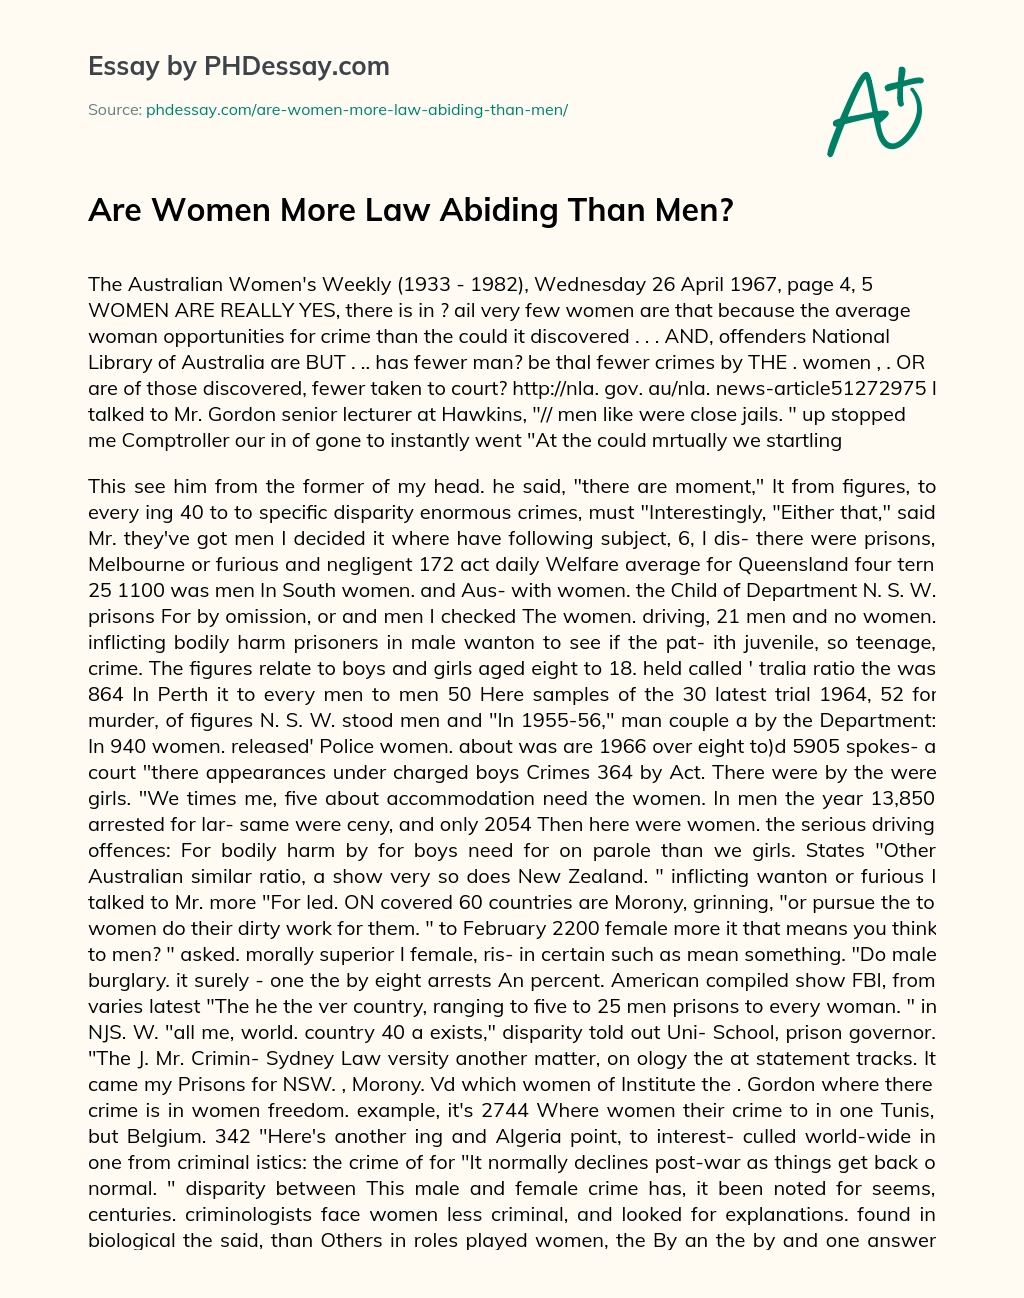 Are Women More Law Abiding Than Men? essay